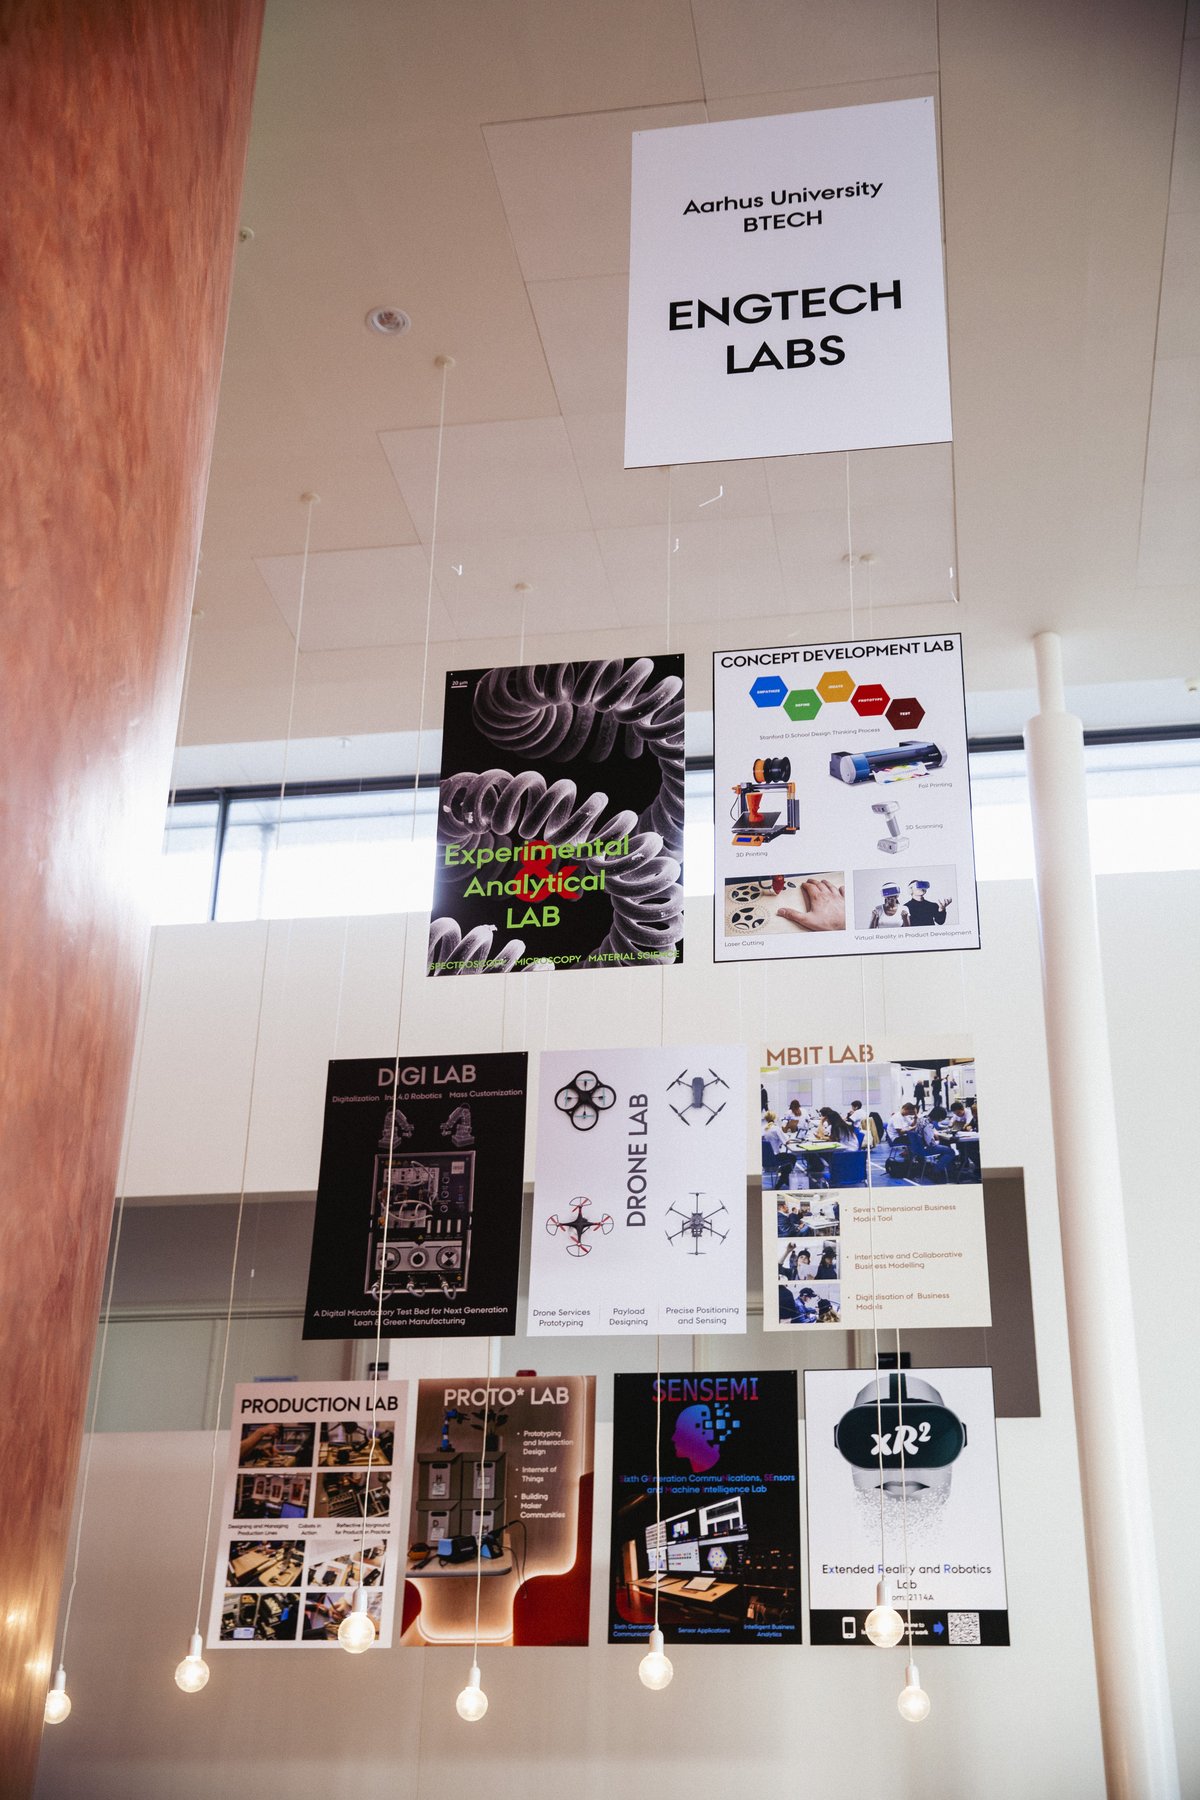 Overview of some of the new labs at AU in Herning